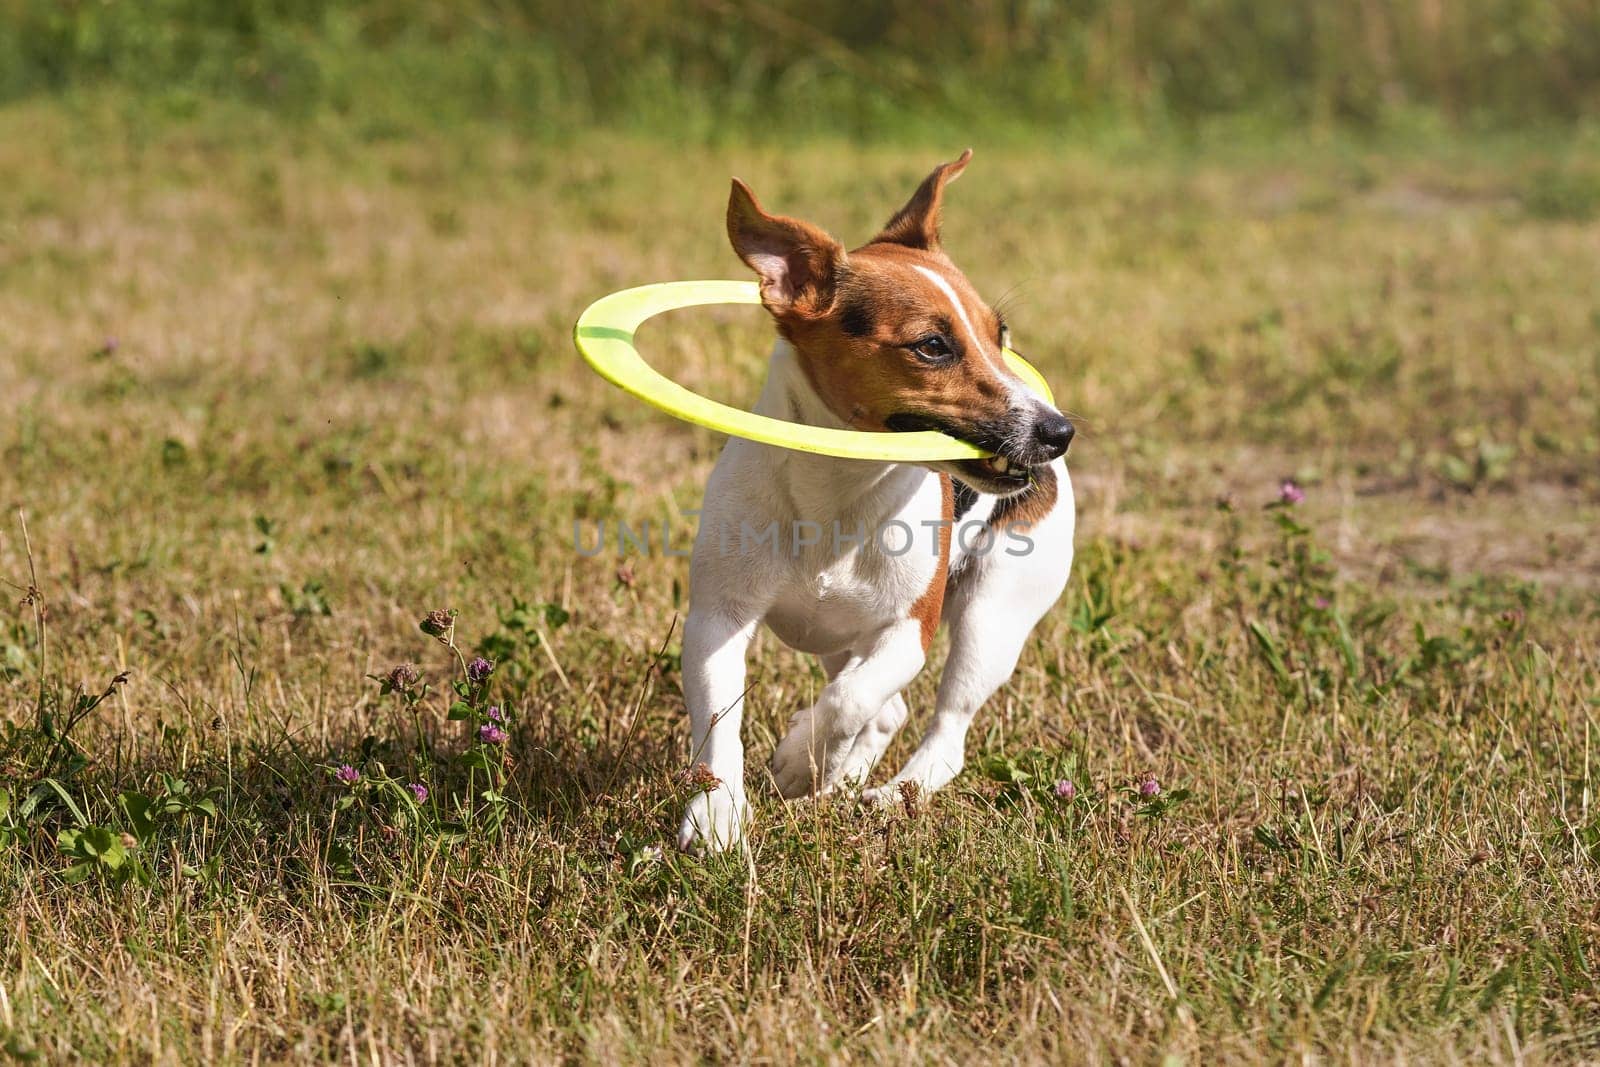 Jack Russell terrier playing with yellow plastic throwing disc on grass meadow, holding it in her mouth by Ivanko